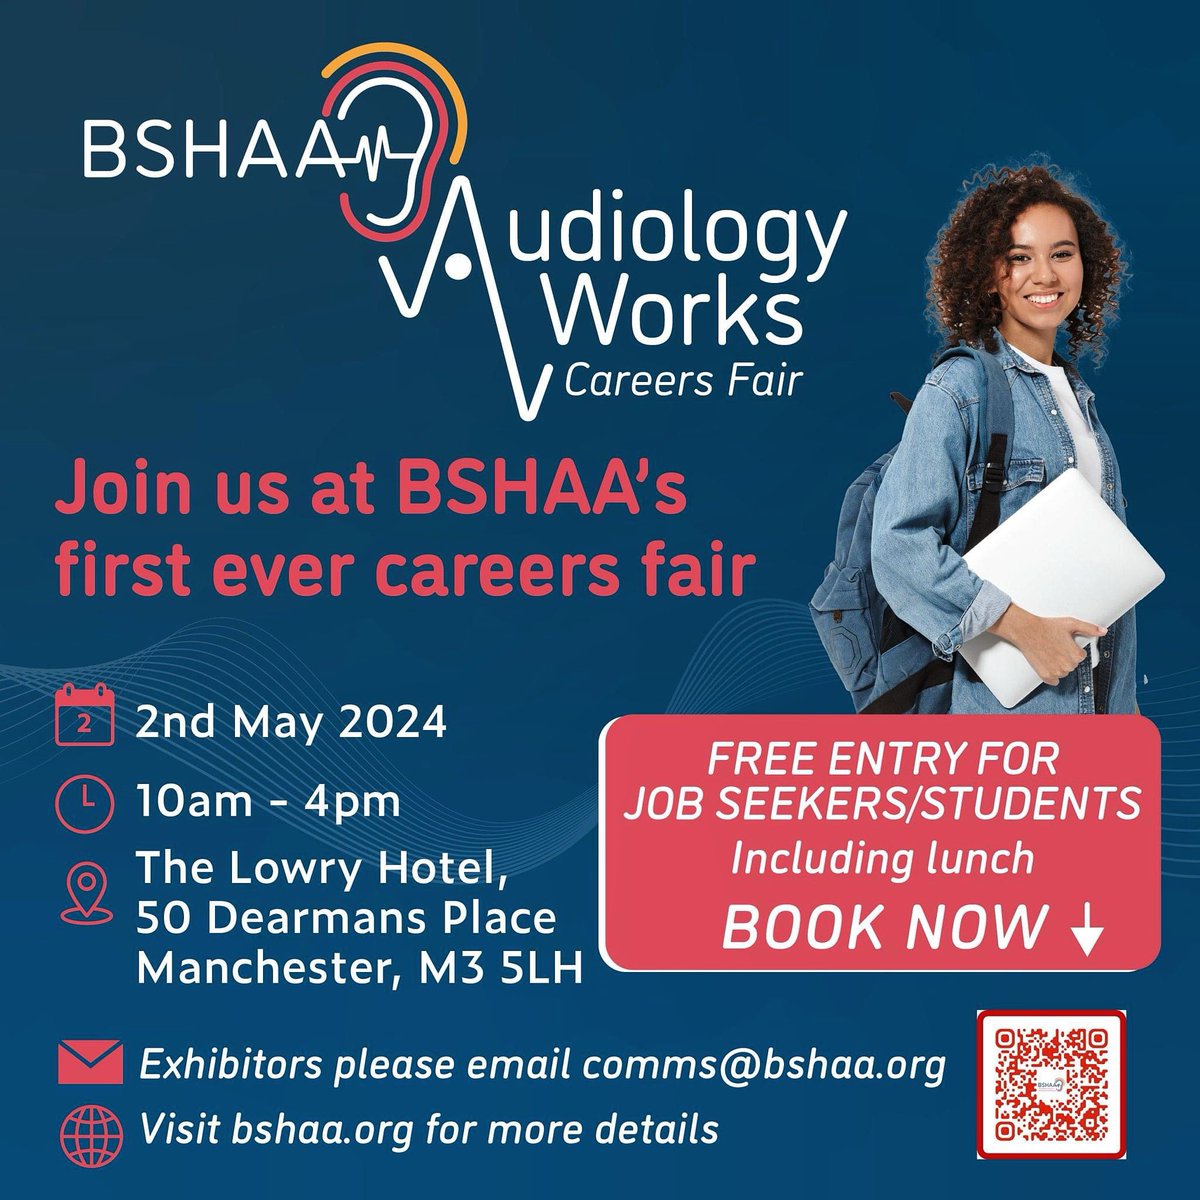 Join us at the BSHAA 'Audiology Works' Careers Fair on May 2nd, 2024! 📅 Date: Thursday, May 2nd, 2024 🕙 Time: 10am - 4pm 📍 Location: The Lowry Hotel, 50 Dearmans Place, Salford, M3 5LH 🍽️ Lunch: Enjoy a complimentary buffet lunch from 12pm to 2pm! #BSHAA #CareersFair